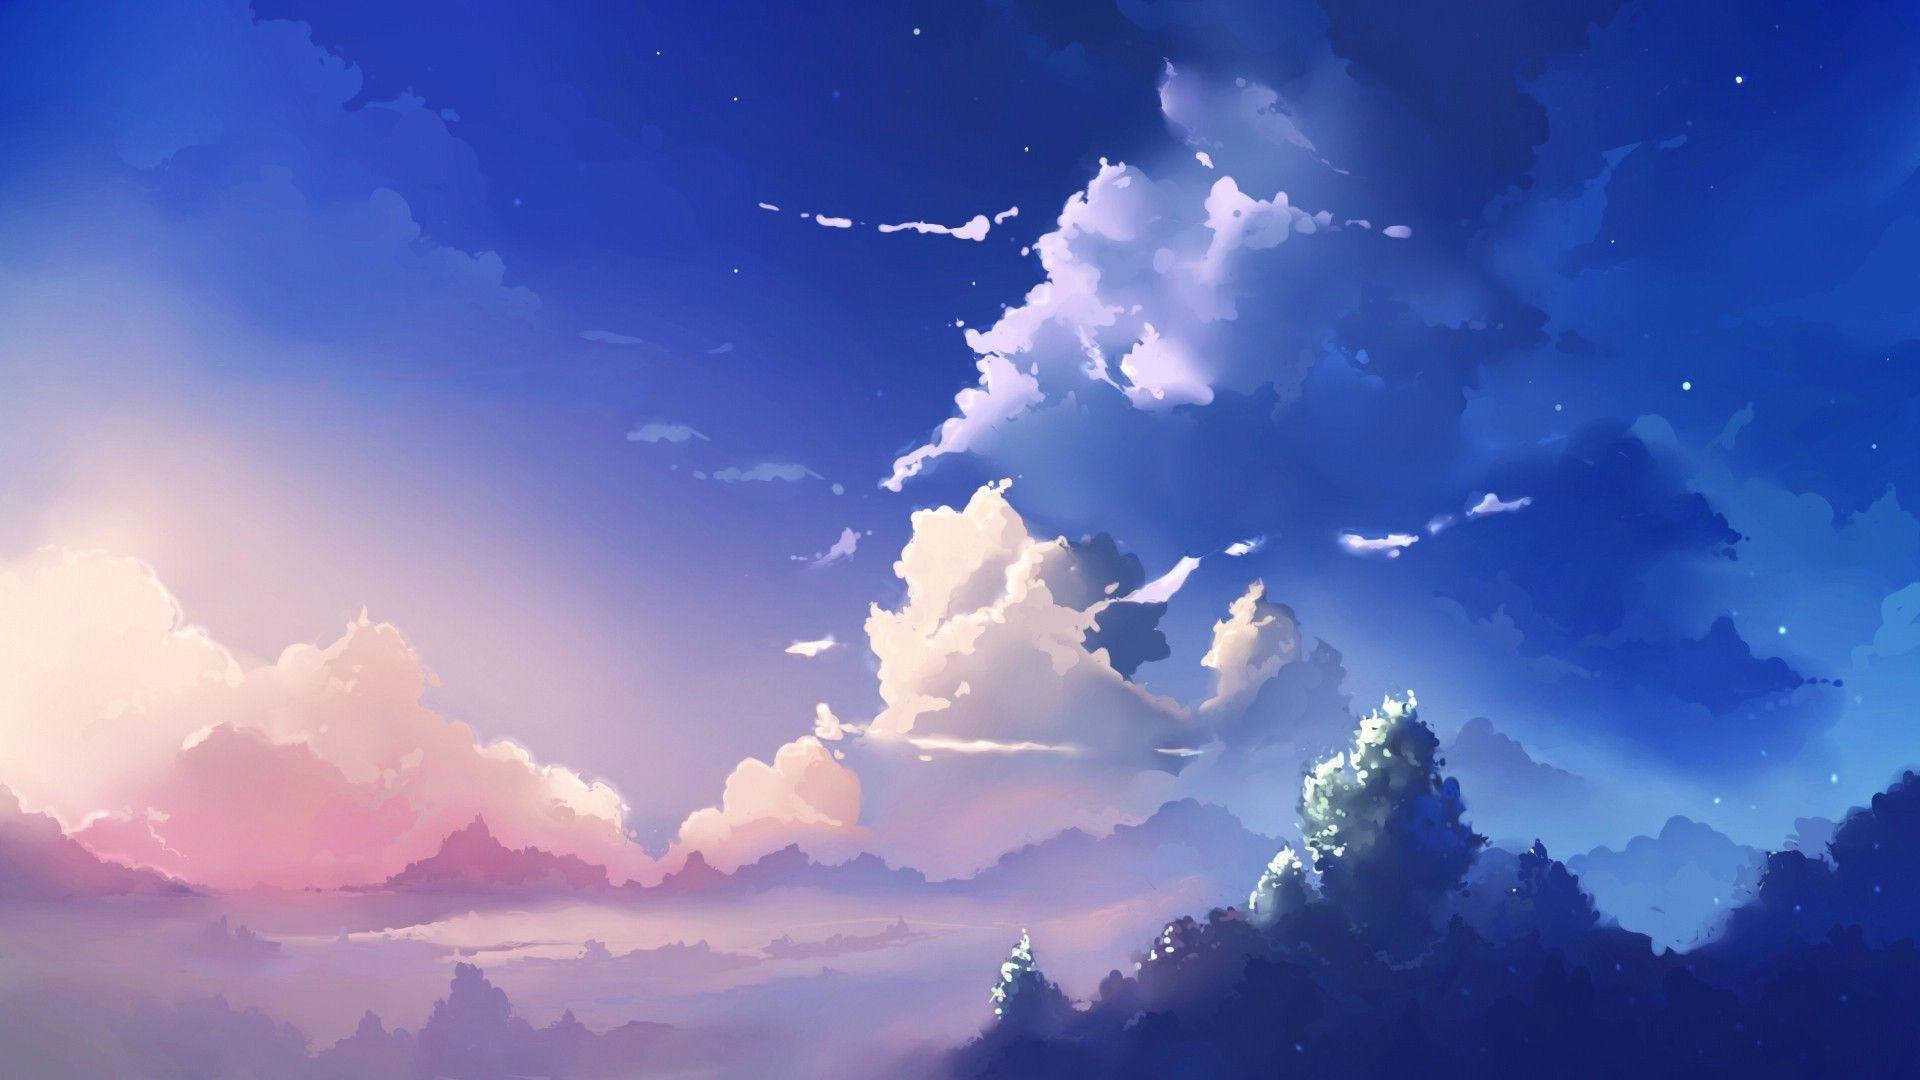 Anime Backgrounds HD - Wallpaper Cave